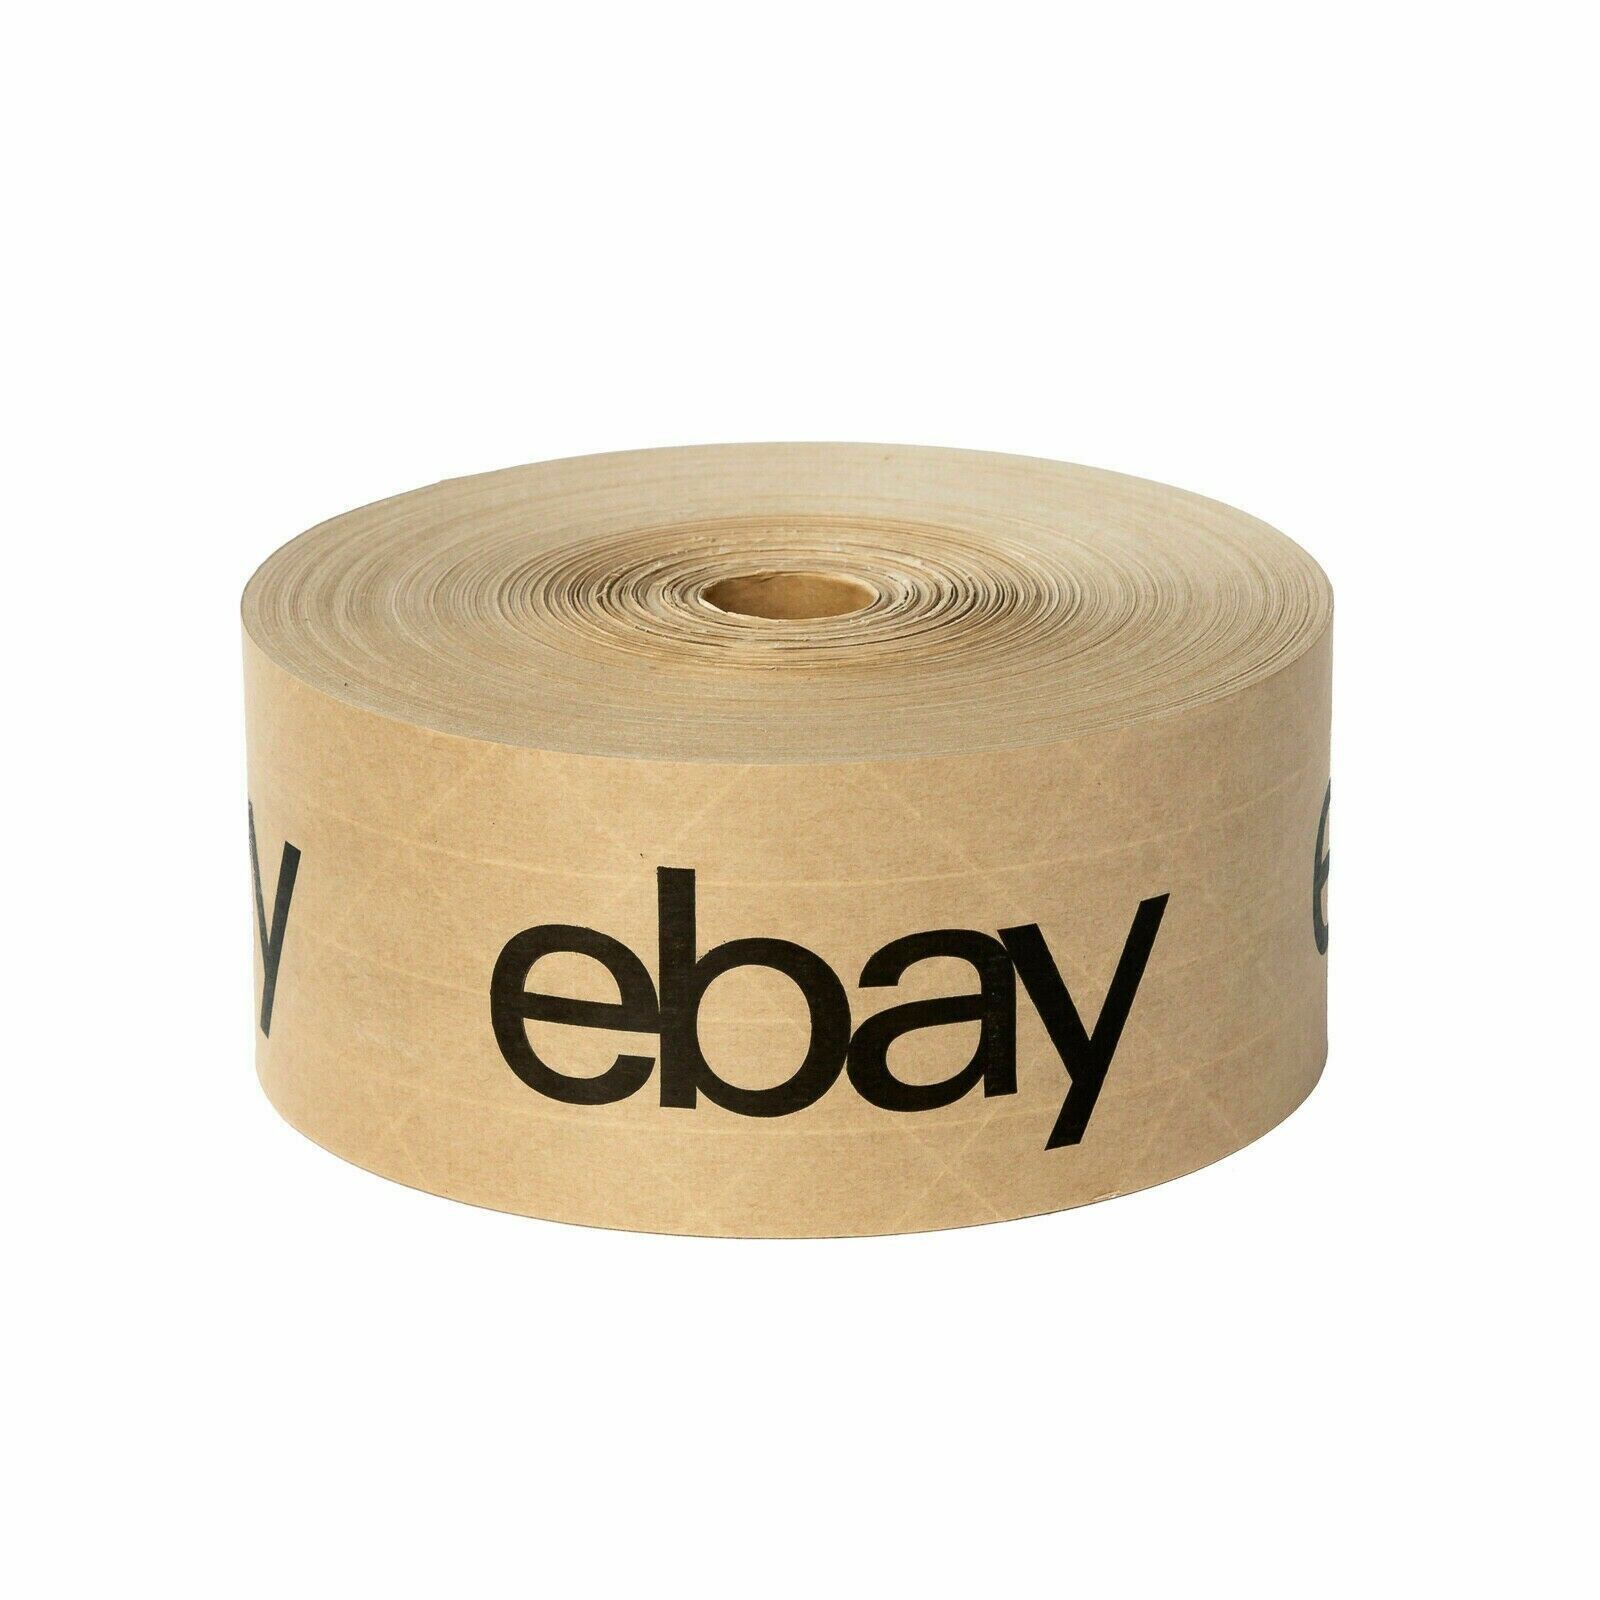 eBay Brand Black Letters Water Packaging Sealing Tape New Max 78% OFF product 2.7 Carton